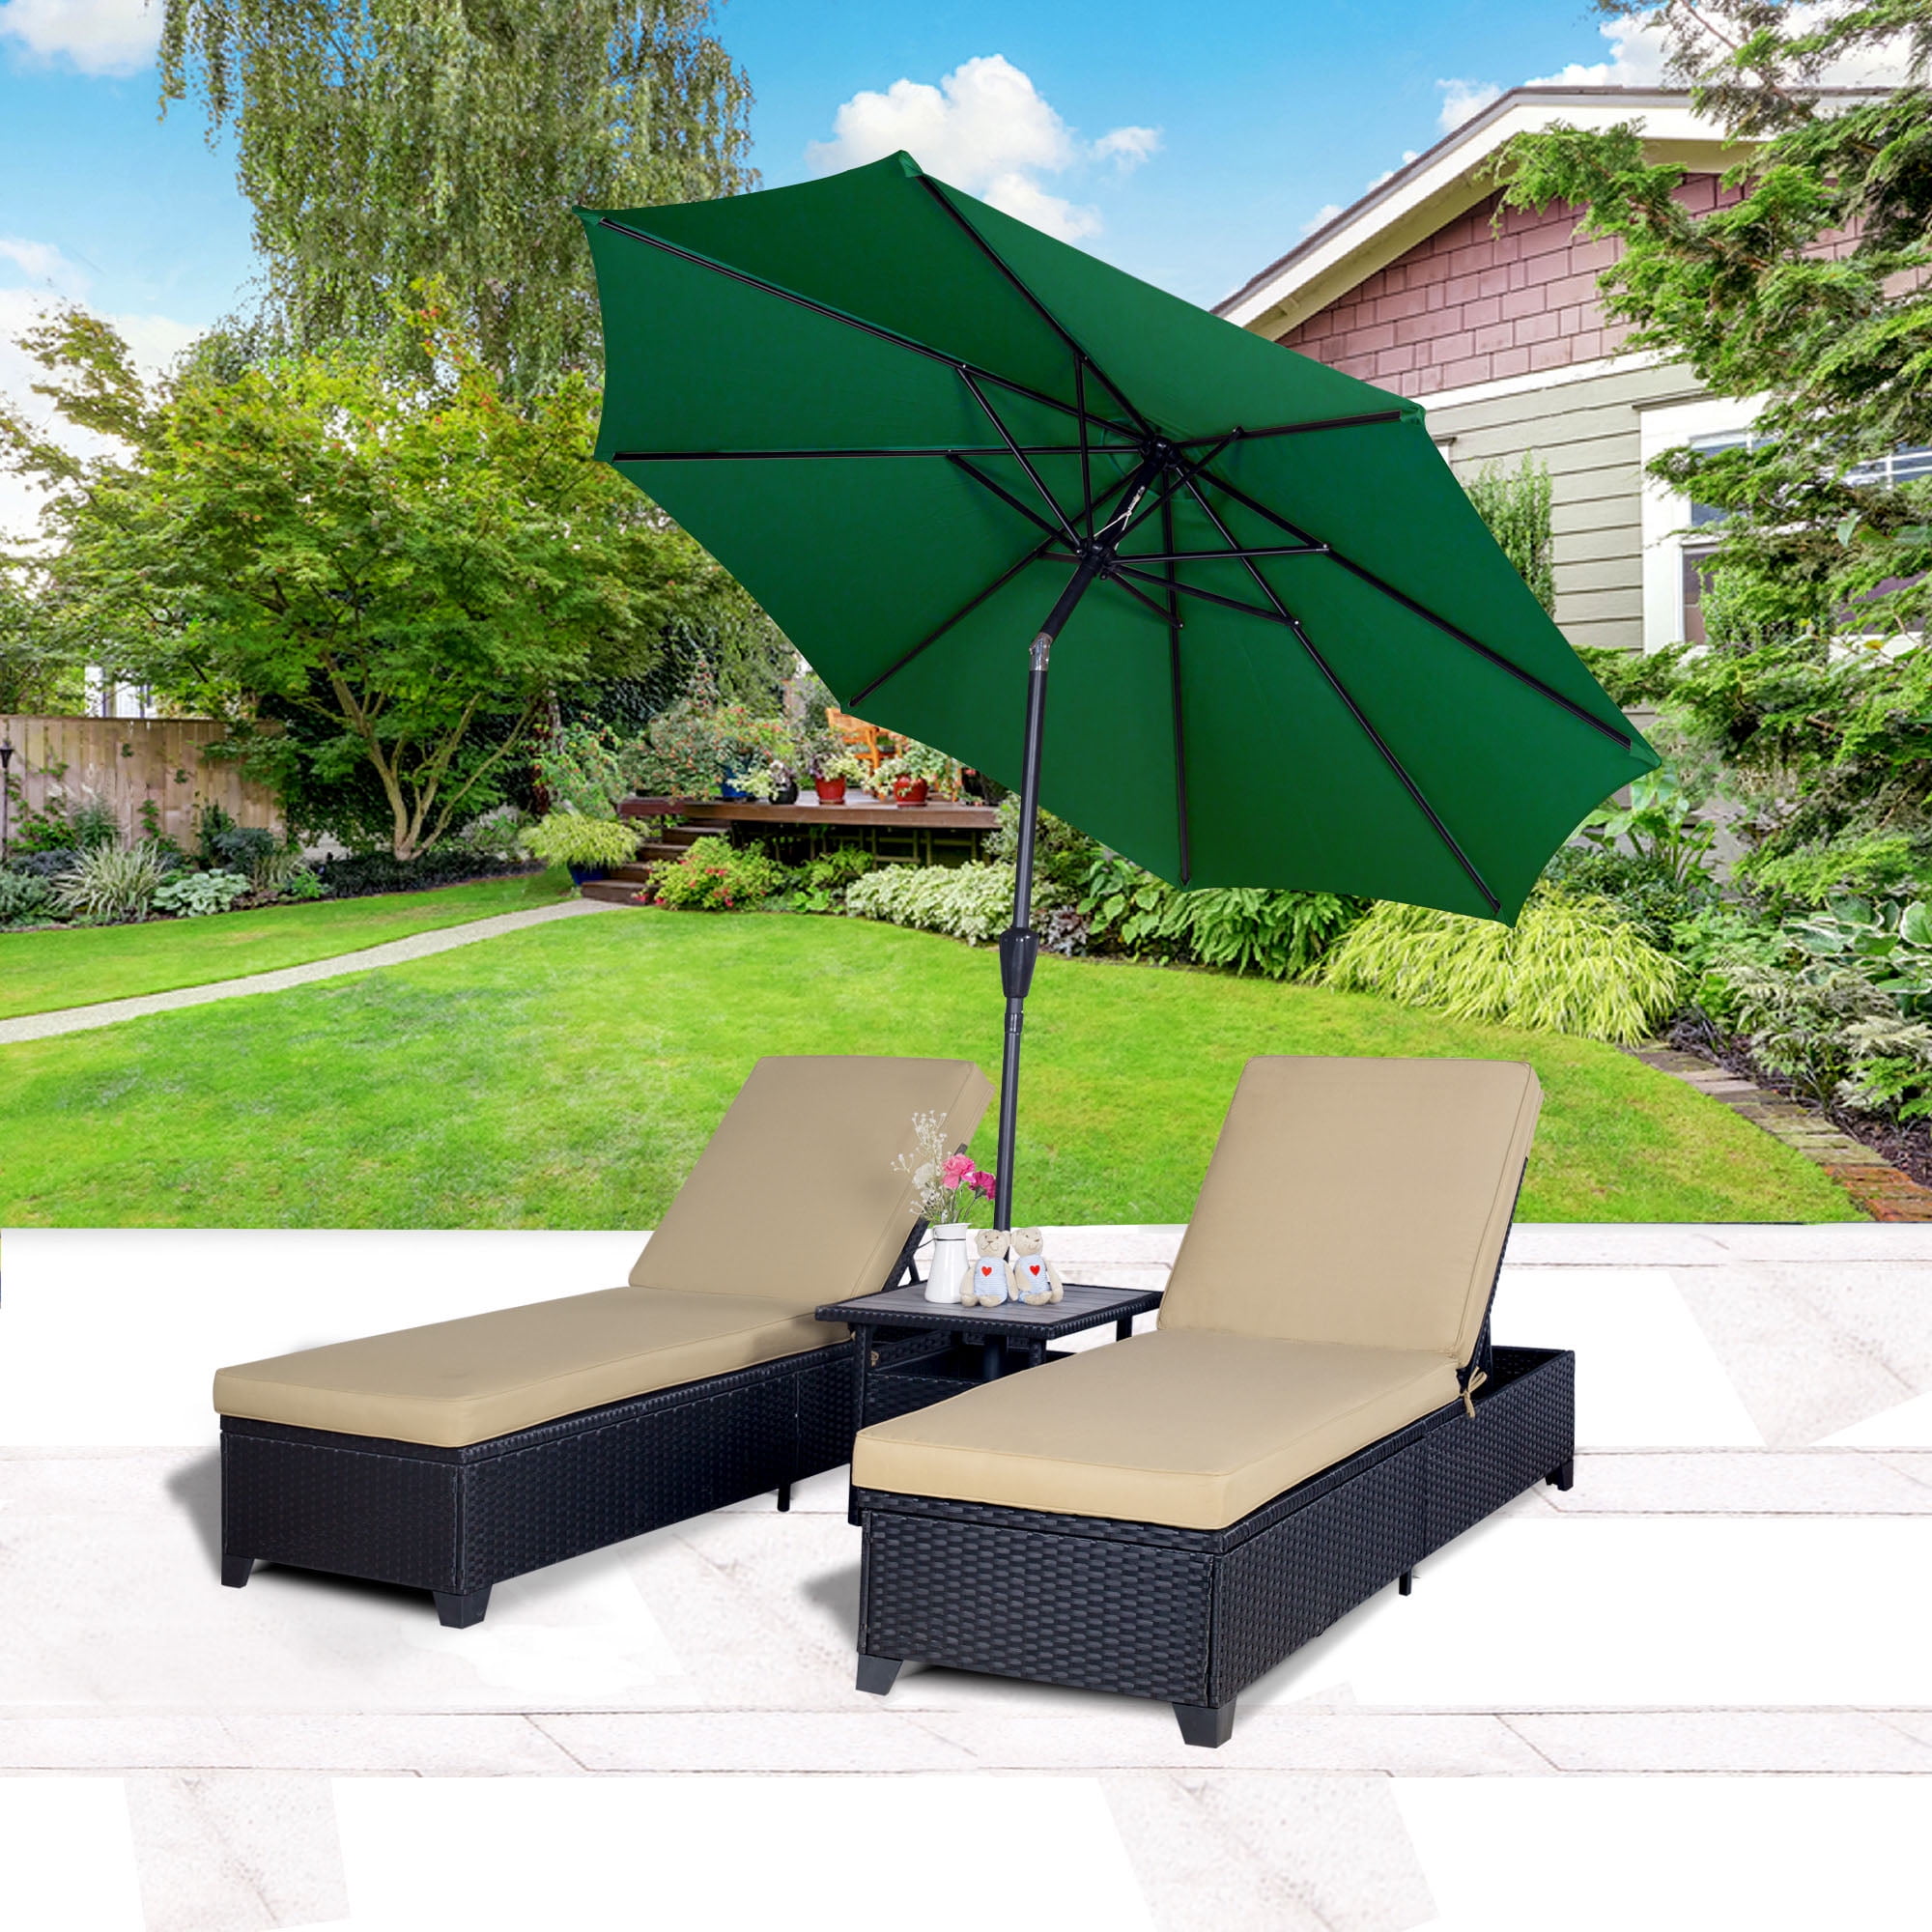 Cloud Mountain 4PC Outdoor Rattan Chaise Lounge Chair with 9' Umbrella